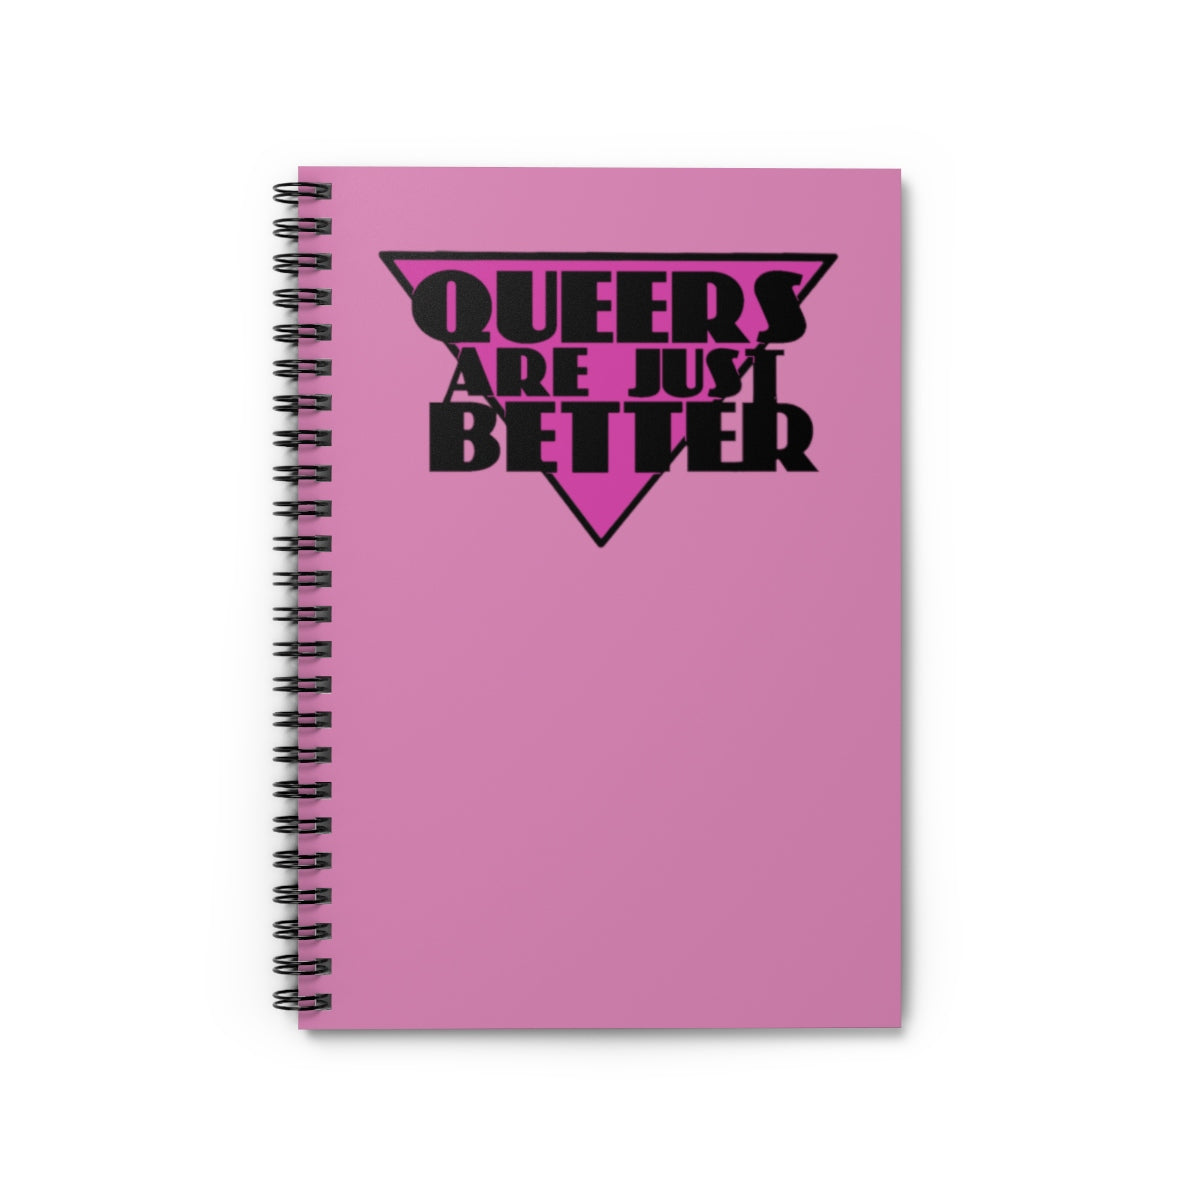 Queers Are Just Better Spiral Notebook - Ruled Line - MISTERBNATION